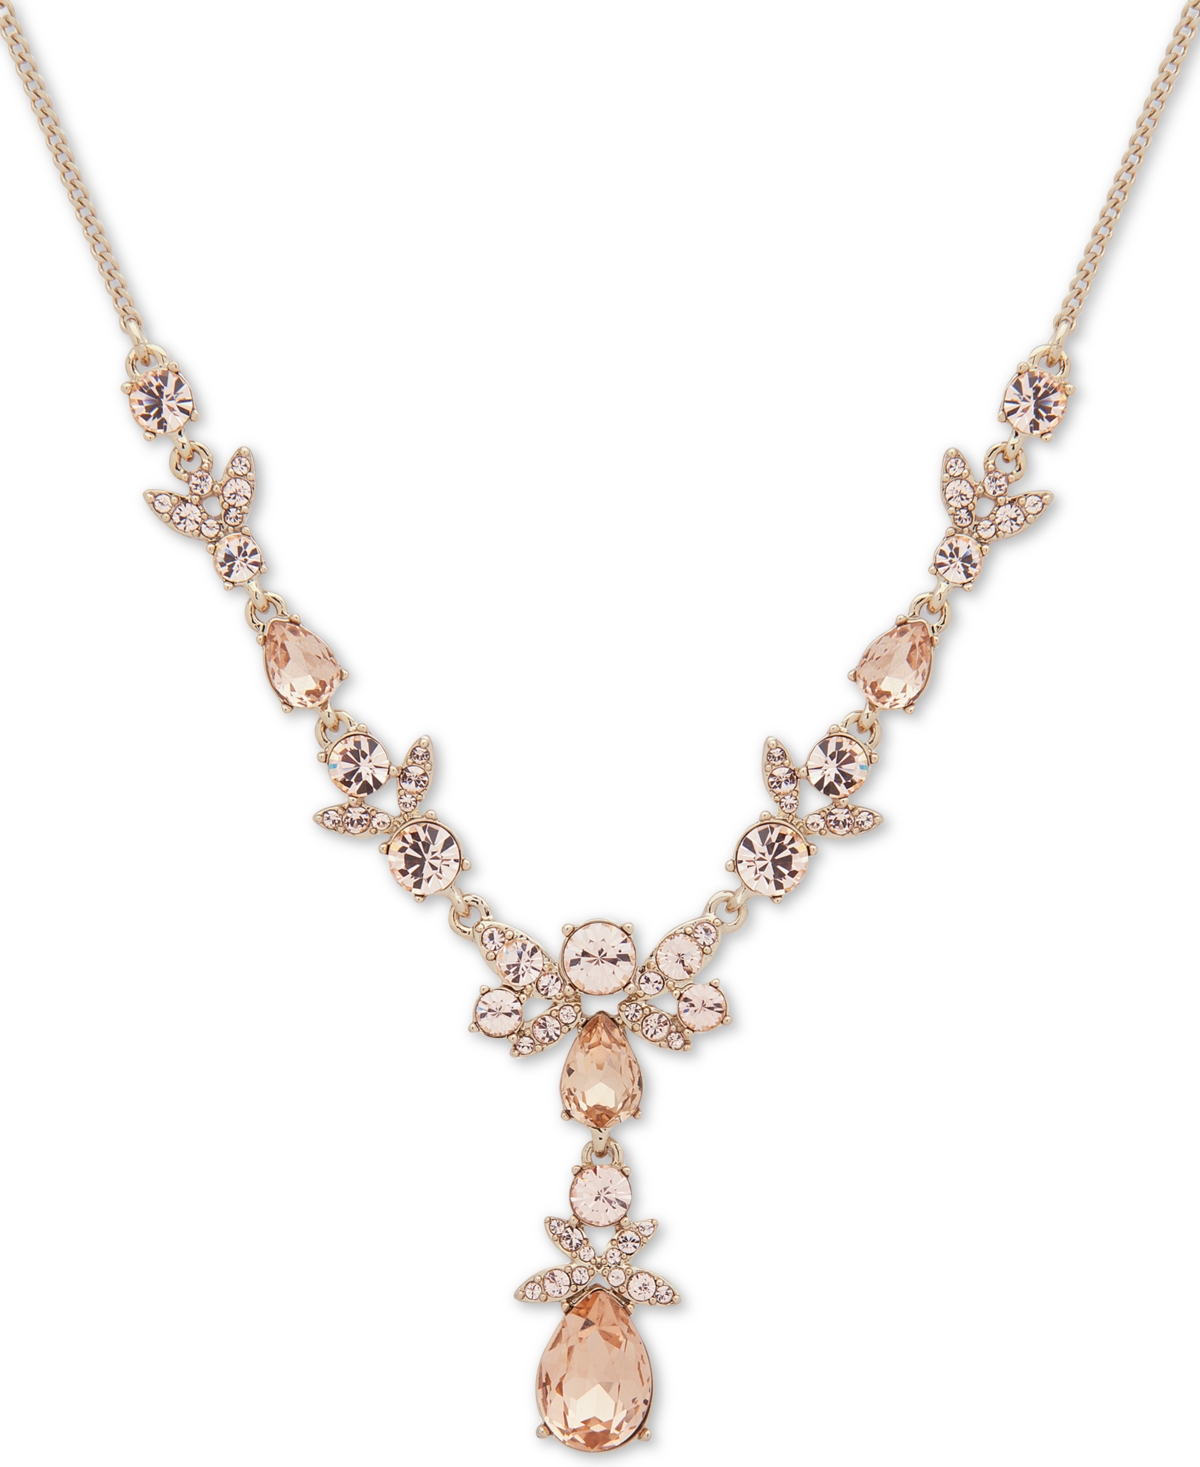 Gold-Tone Crystal Lariat Necklace, 16" + 3" extender - Gold